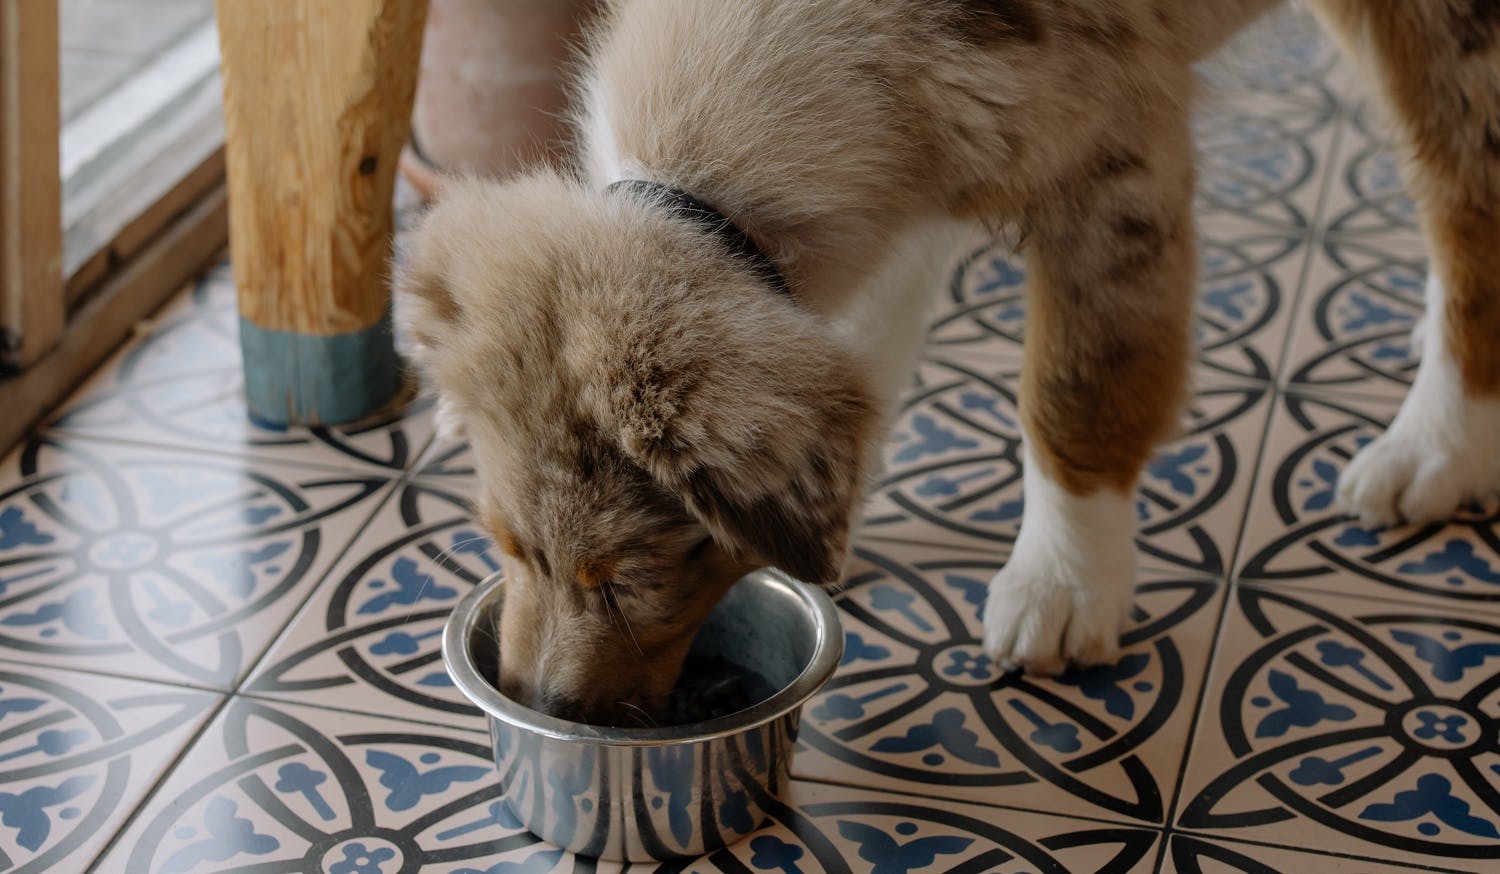 Puppy eating food from a bowl